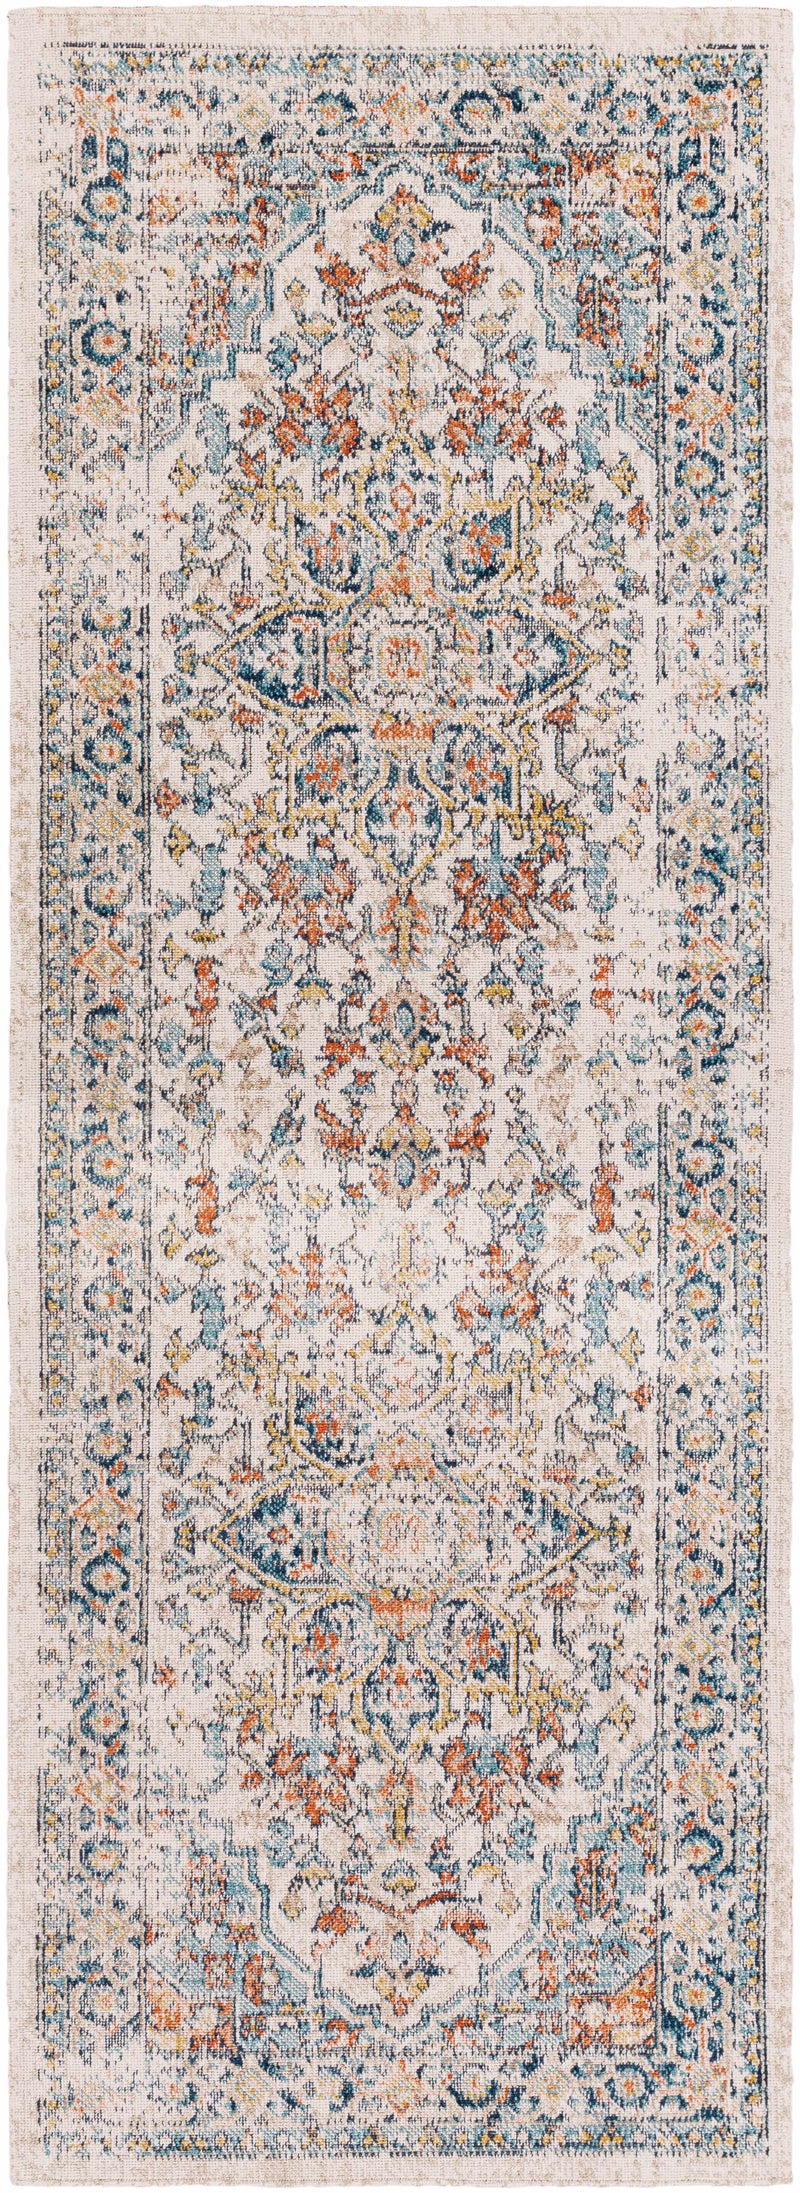 Boutique Rugs - Dorval Outdoor Rug Rugs Boutique Rugs 2'7" x 7'3" Runner 